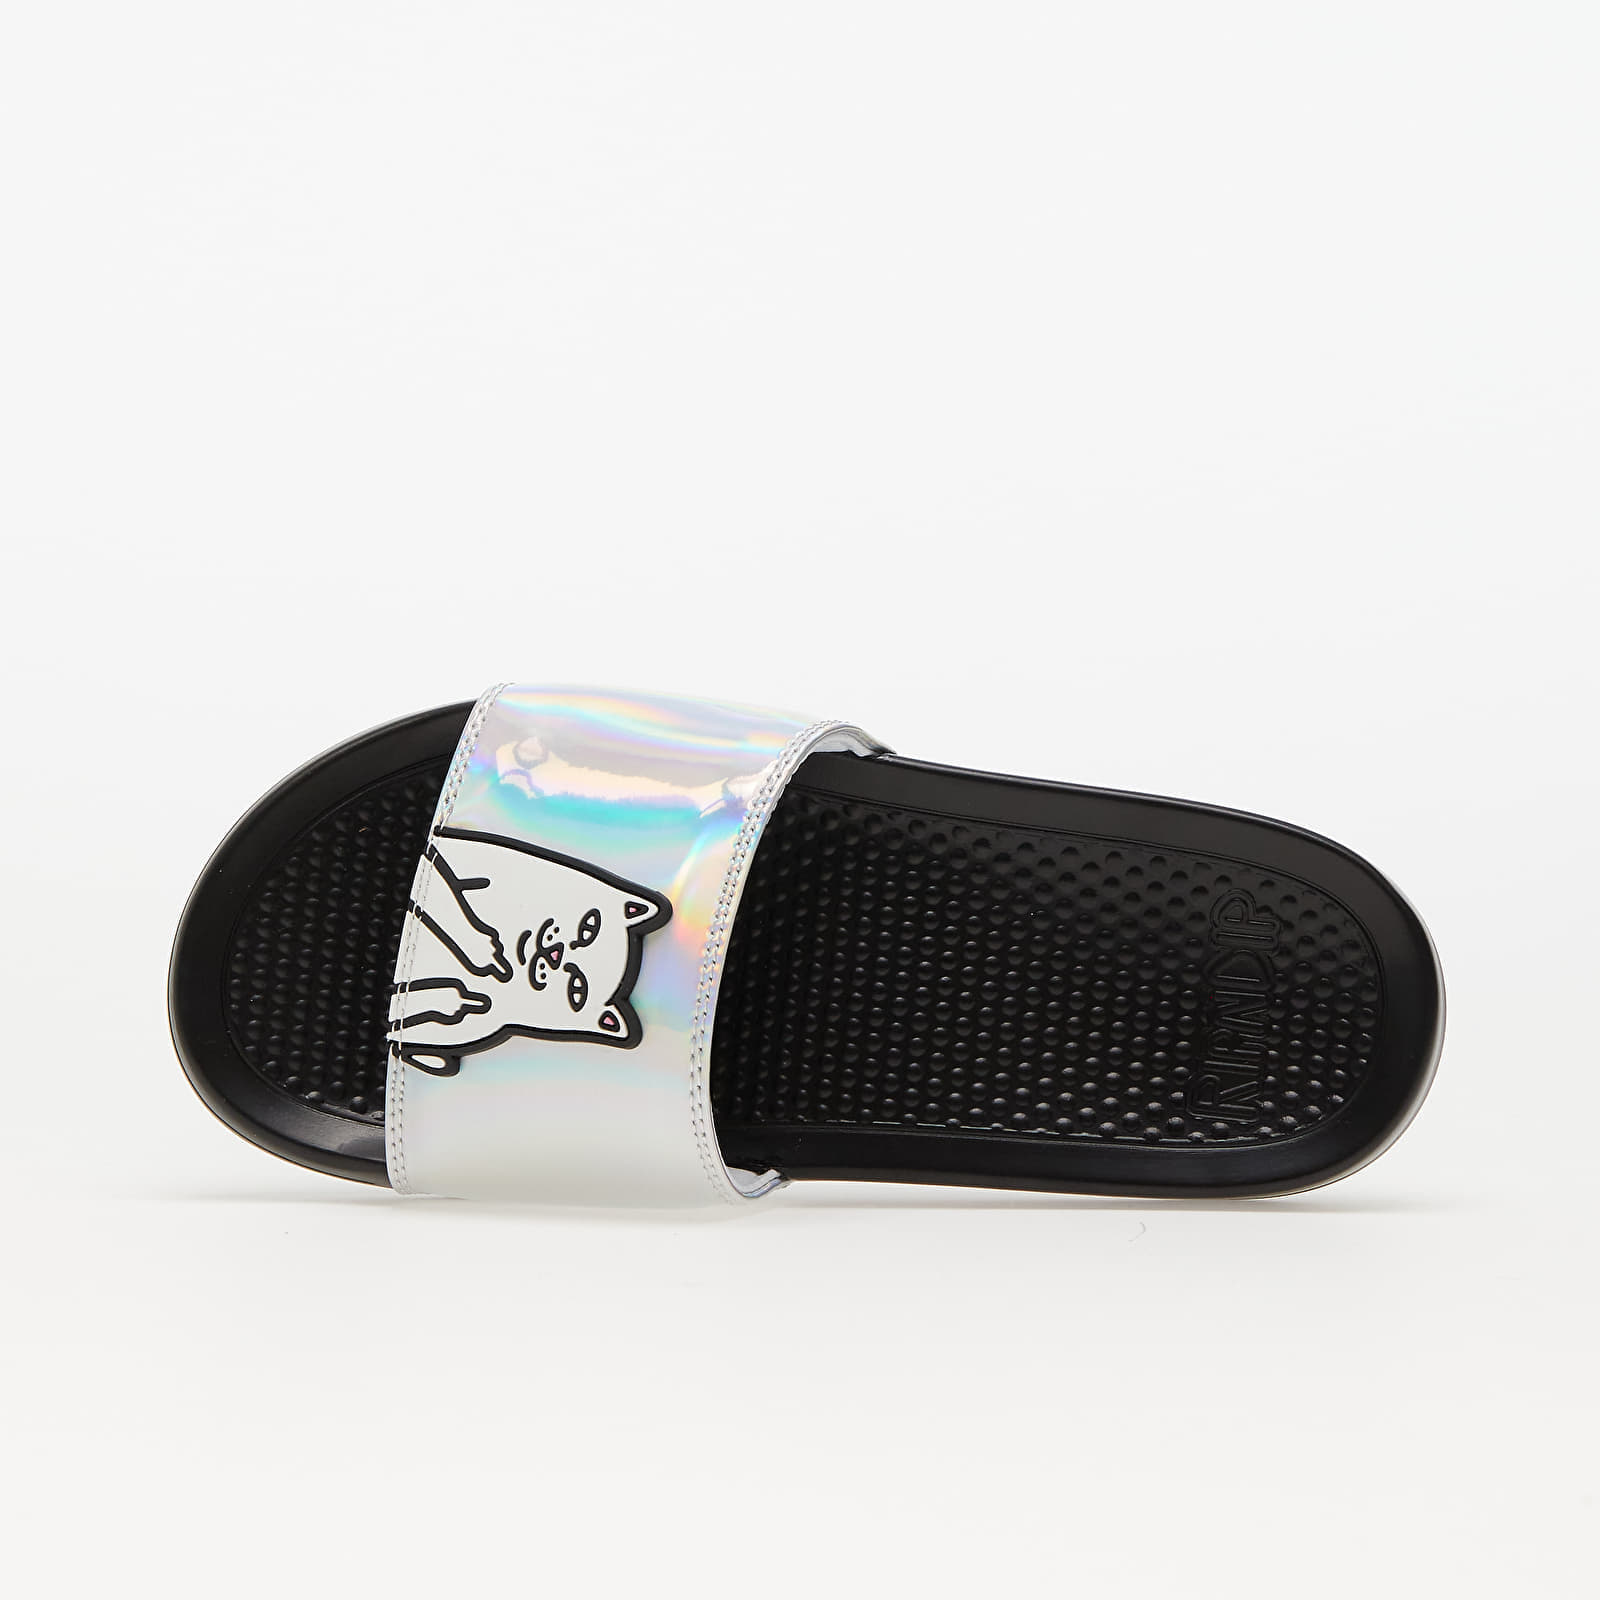 Men's sneakers and shoes RIPNDIP Lord Nermal Slides Iridescent 